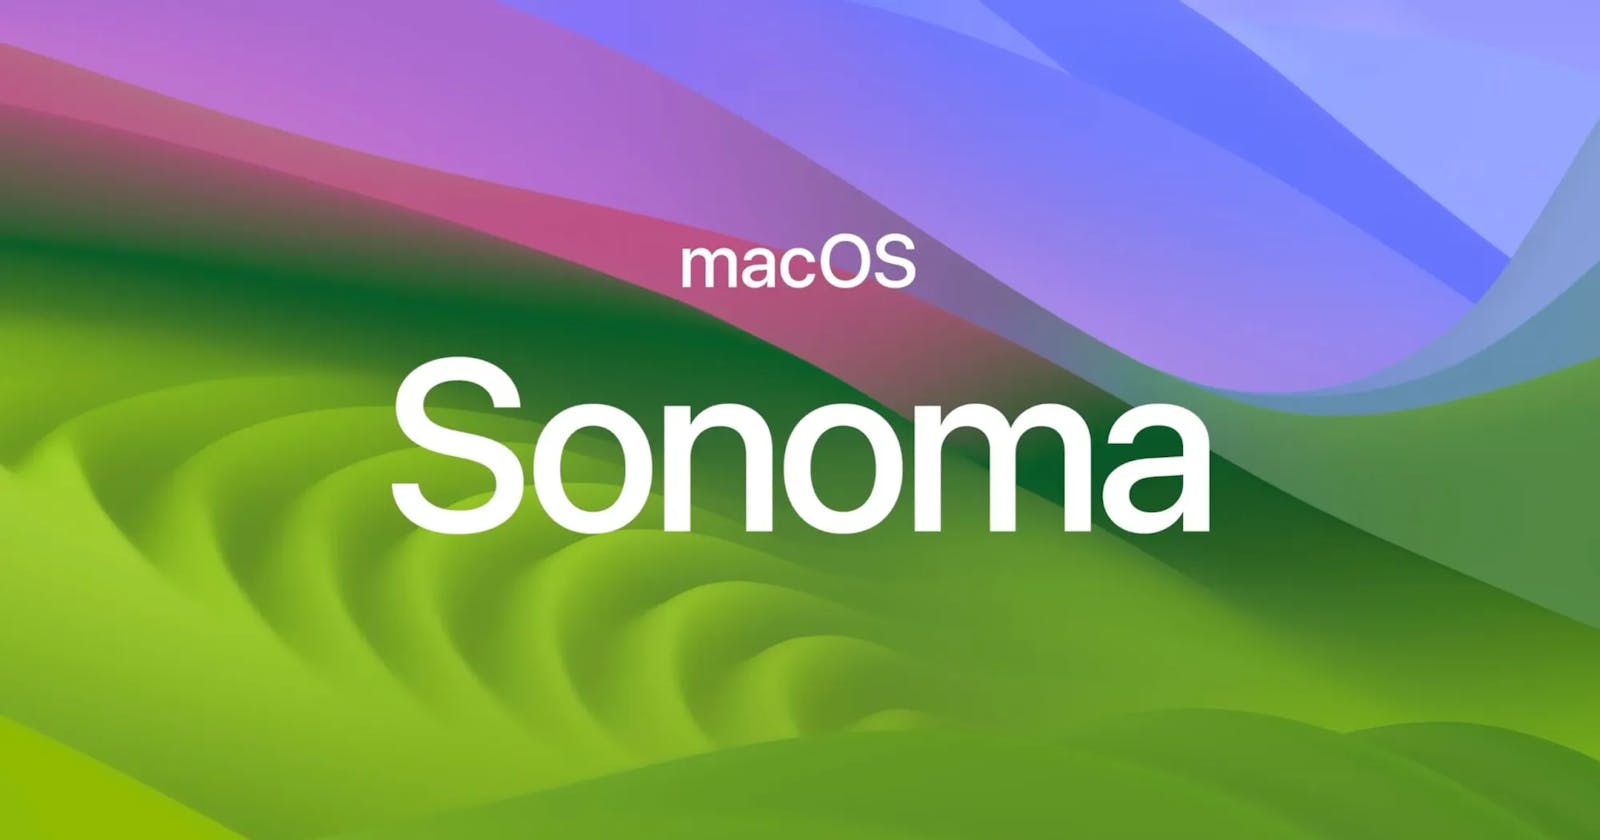 Review: macOS Sonoma Public Beta: Should I update?